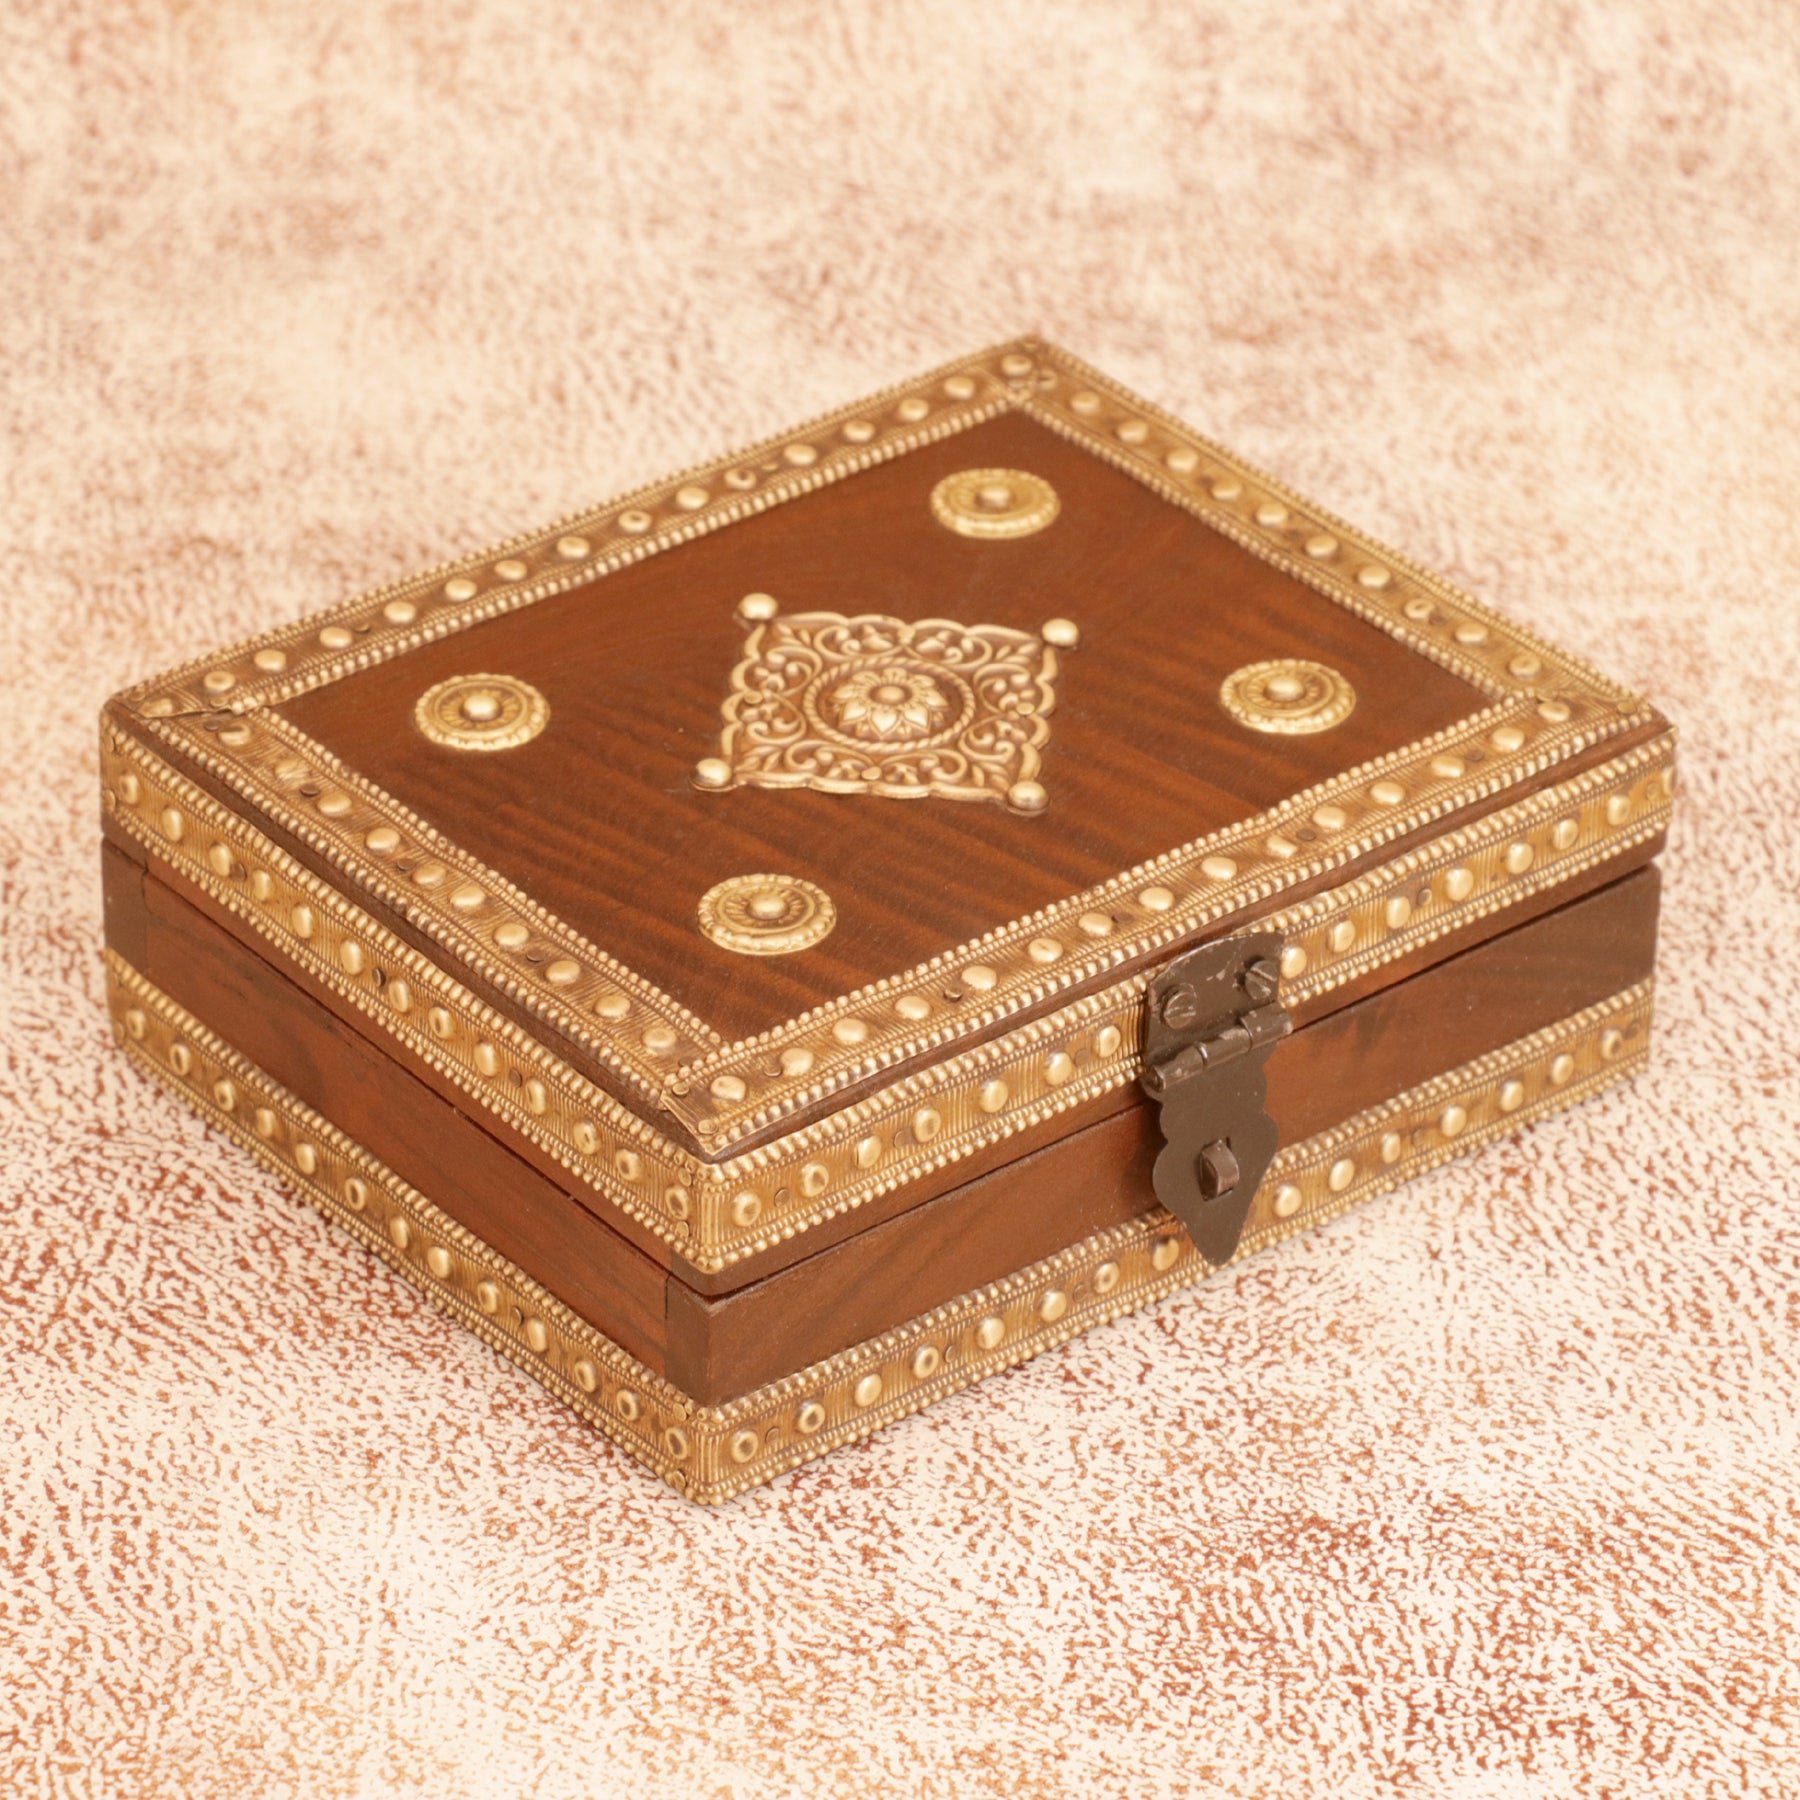 Wooden Classy Boxes Small (7 x 6 x 3 Inch) Wooden Box